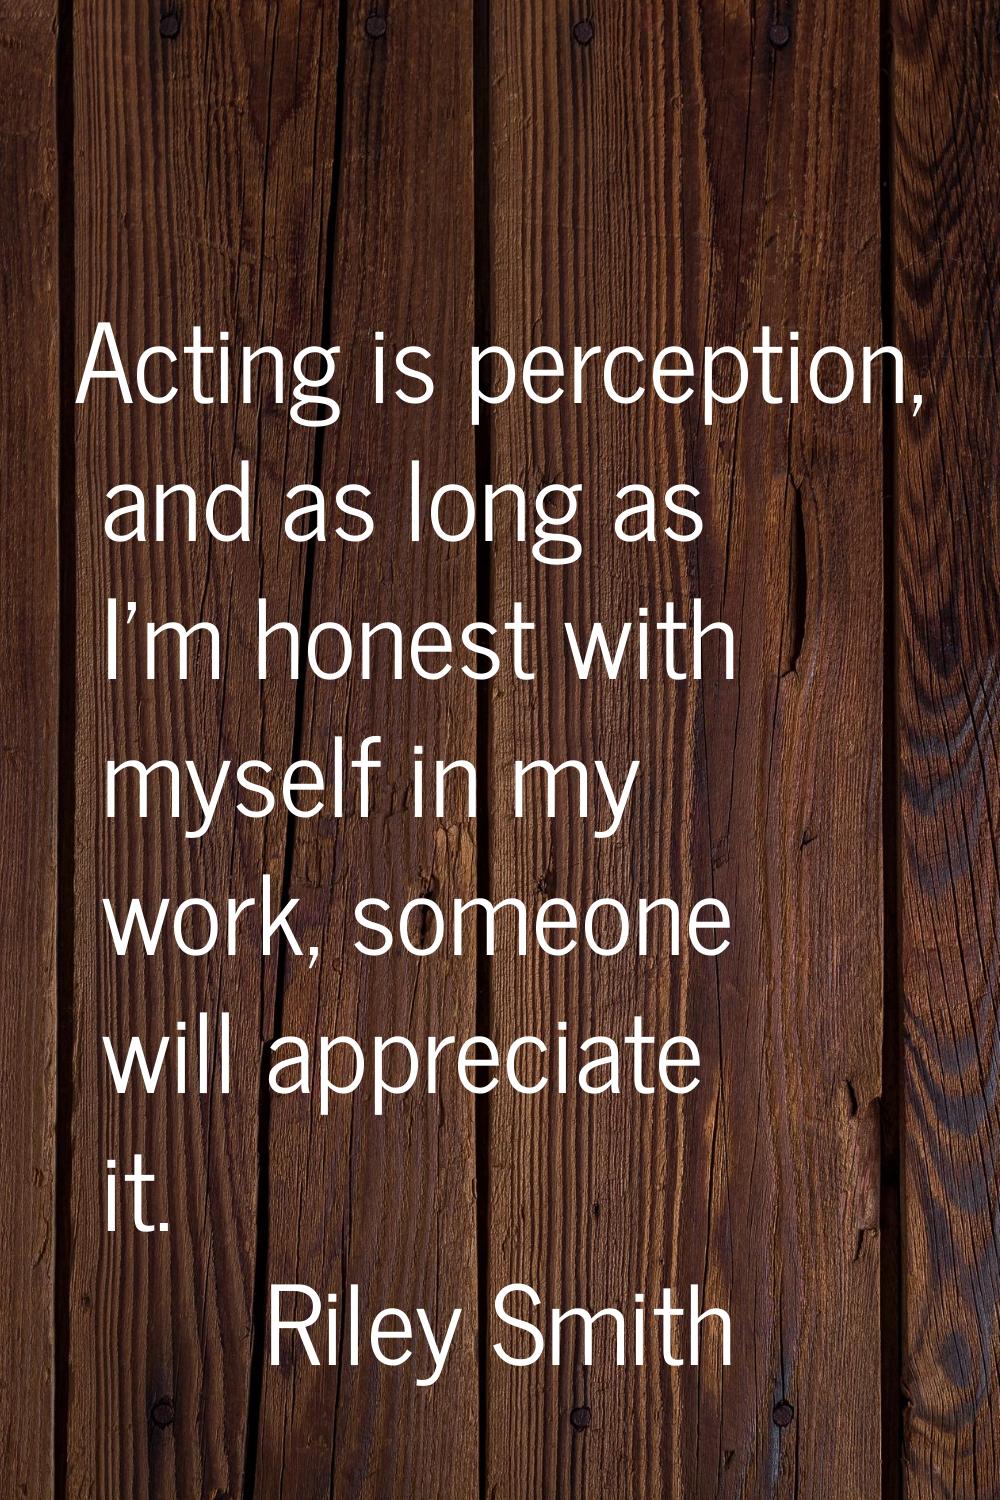 Acting is perception, and as long as I'm honest with myself in my work, someone will appreciate it.